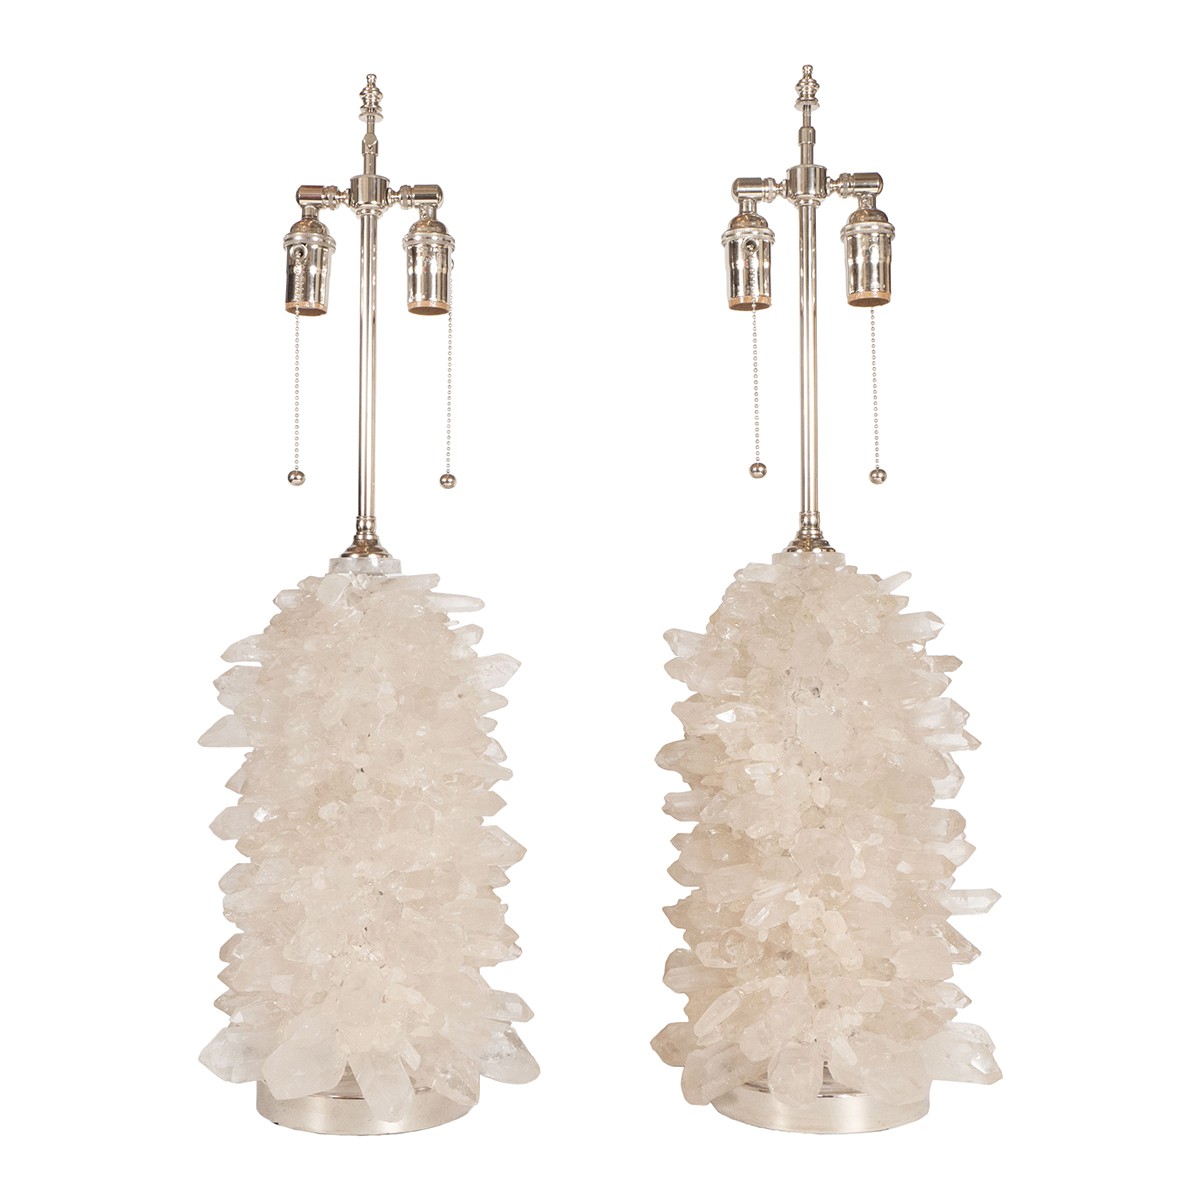 Pair of "Aggregate" Rock Crystal Cluster Lamps by Spark Interior